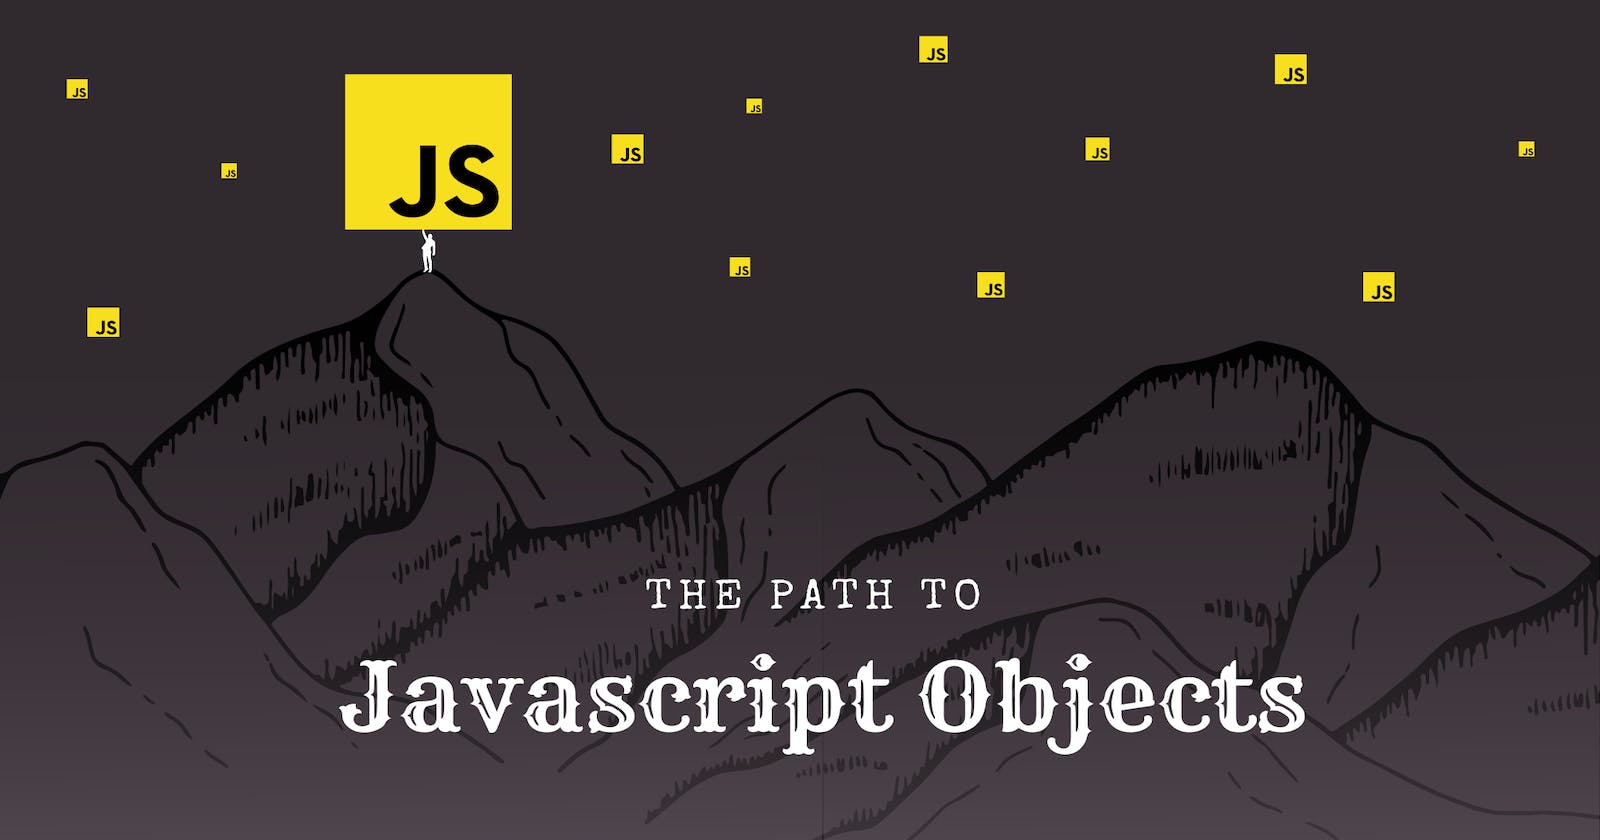 Test out Your JavaScript Object Knowledge